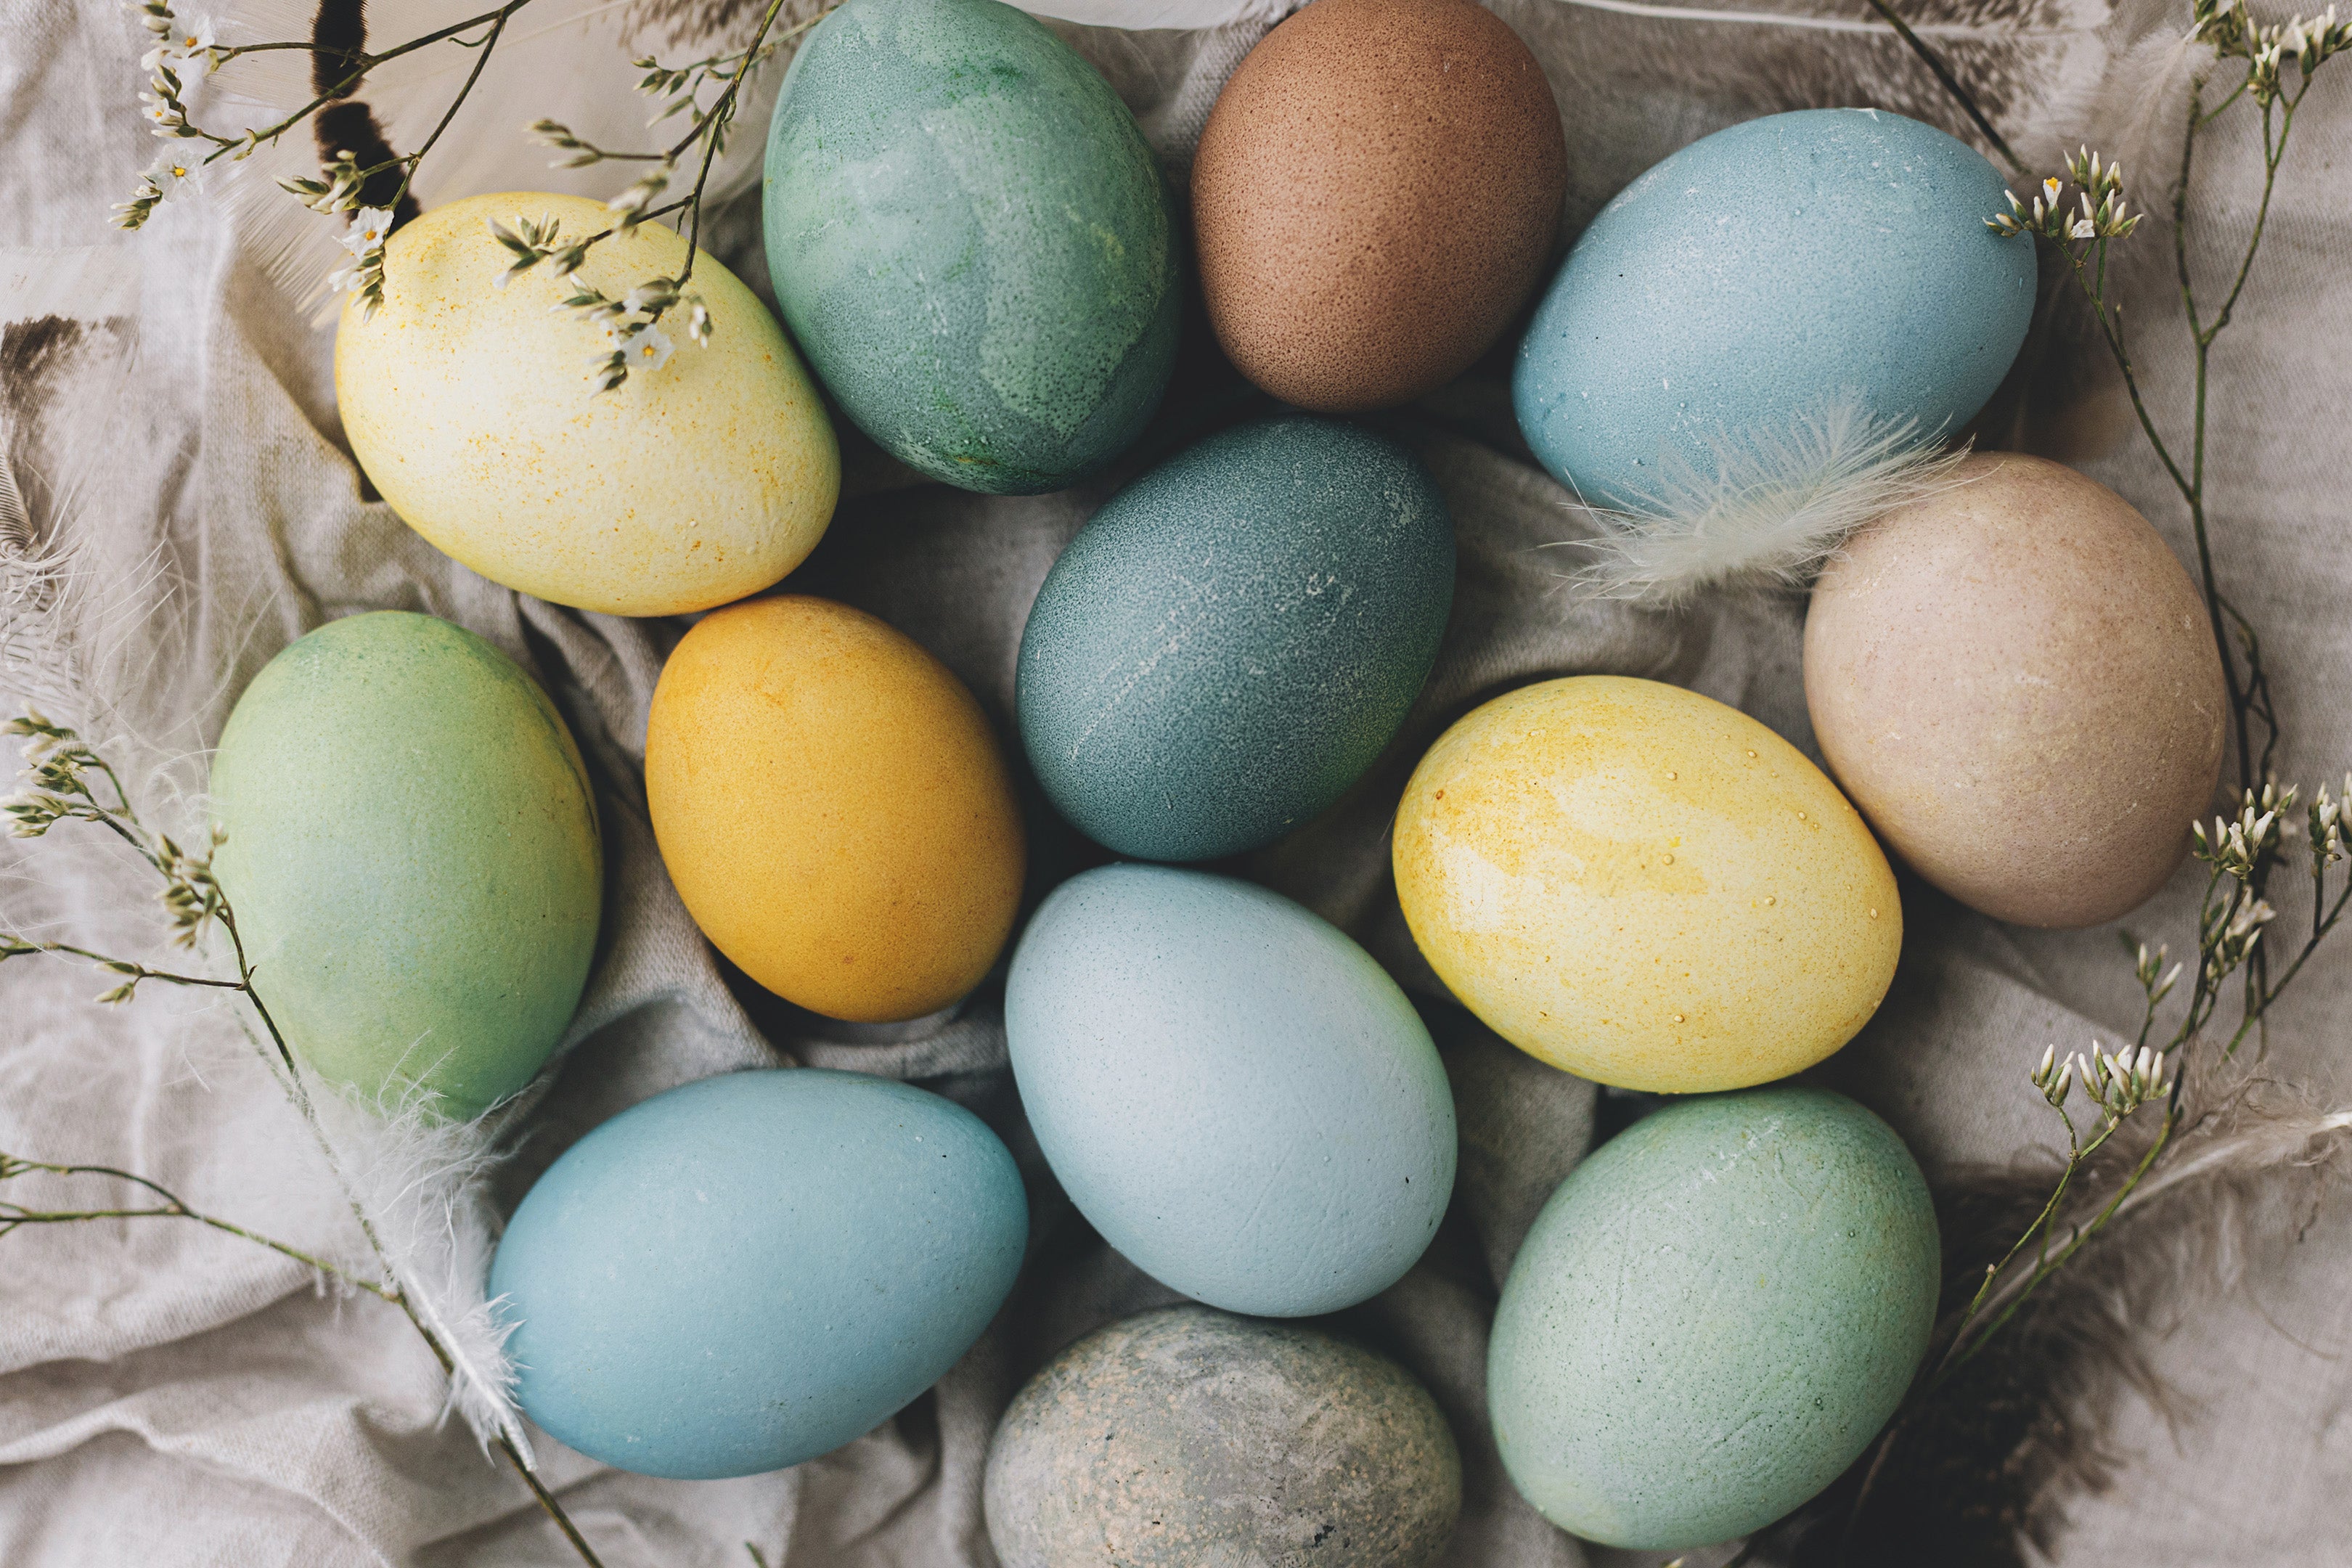 How To Dye Eggs Naturally With Everyday Ingredients